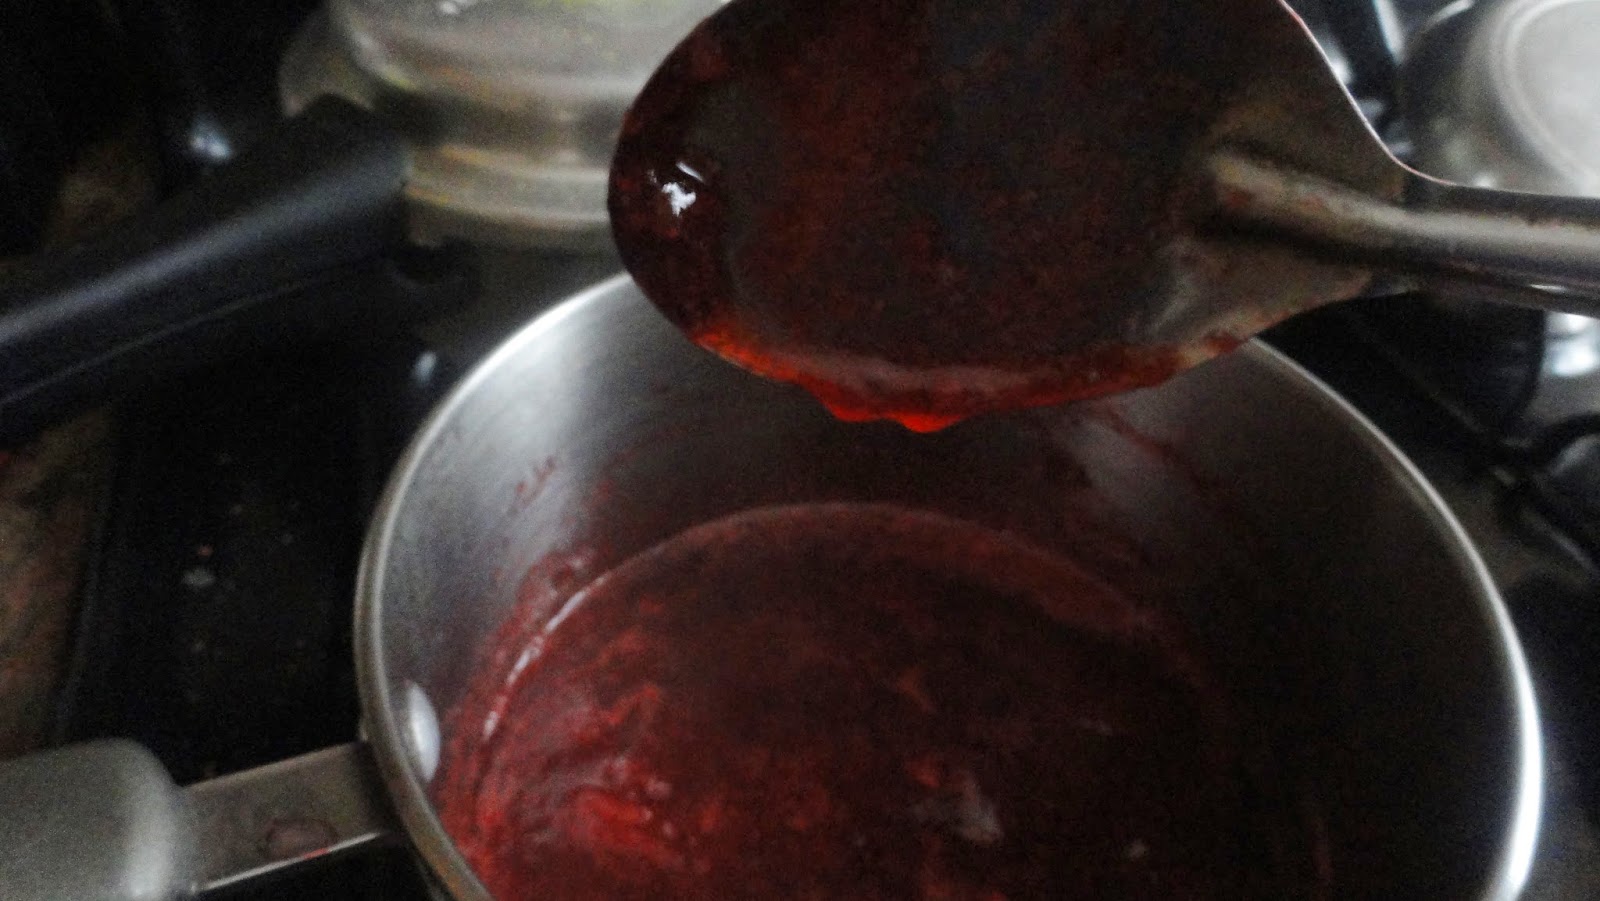 Drop test for strawberry jam